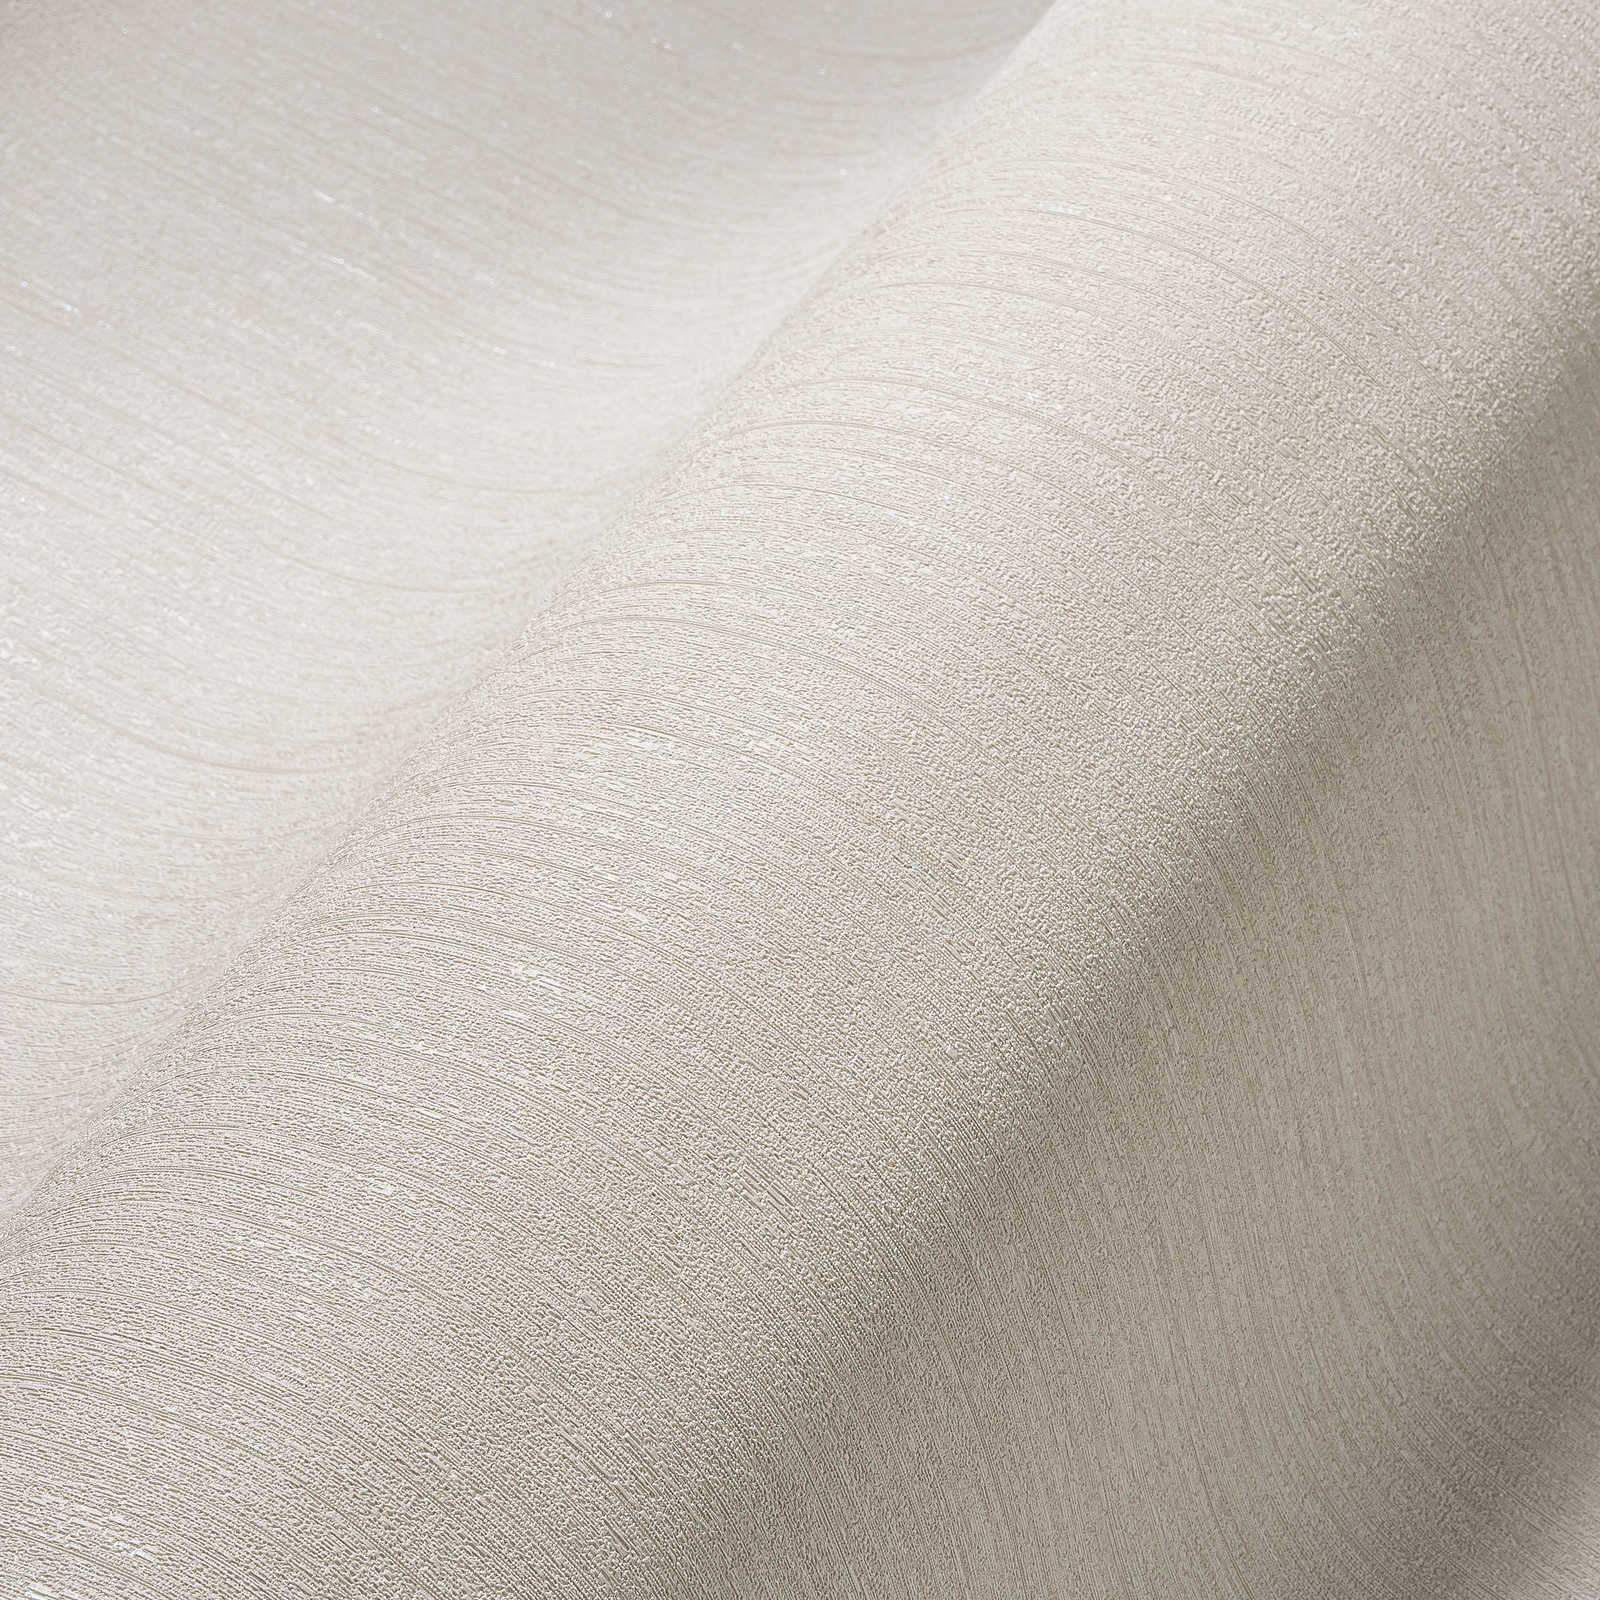             Non-woven wallpaper taupe, plain & satin with texture effect
        